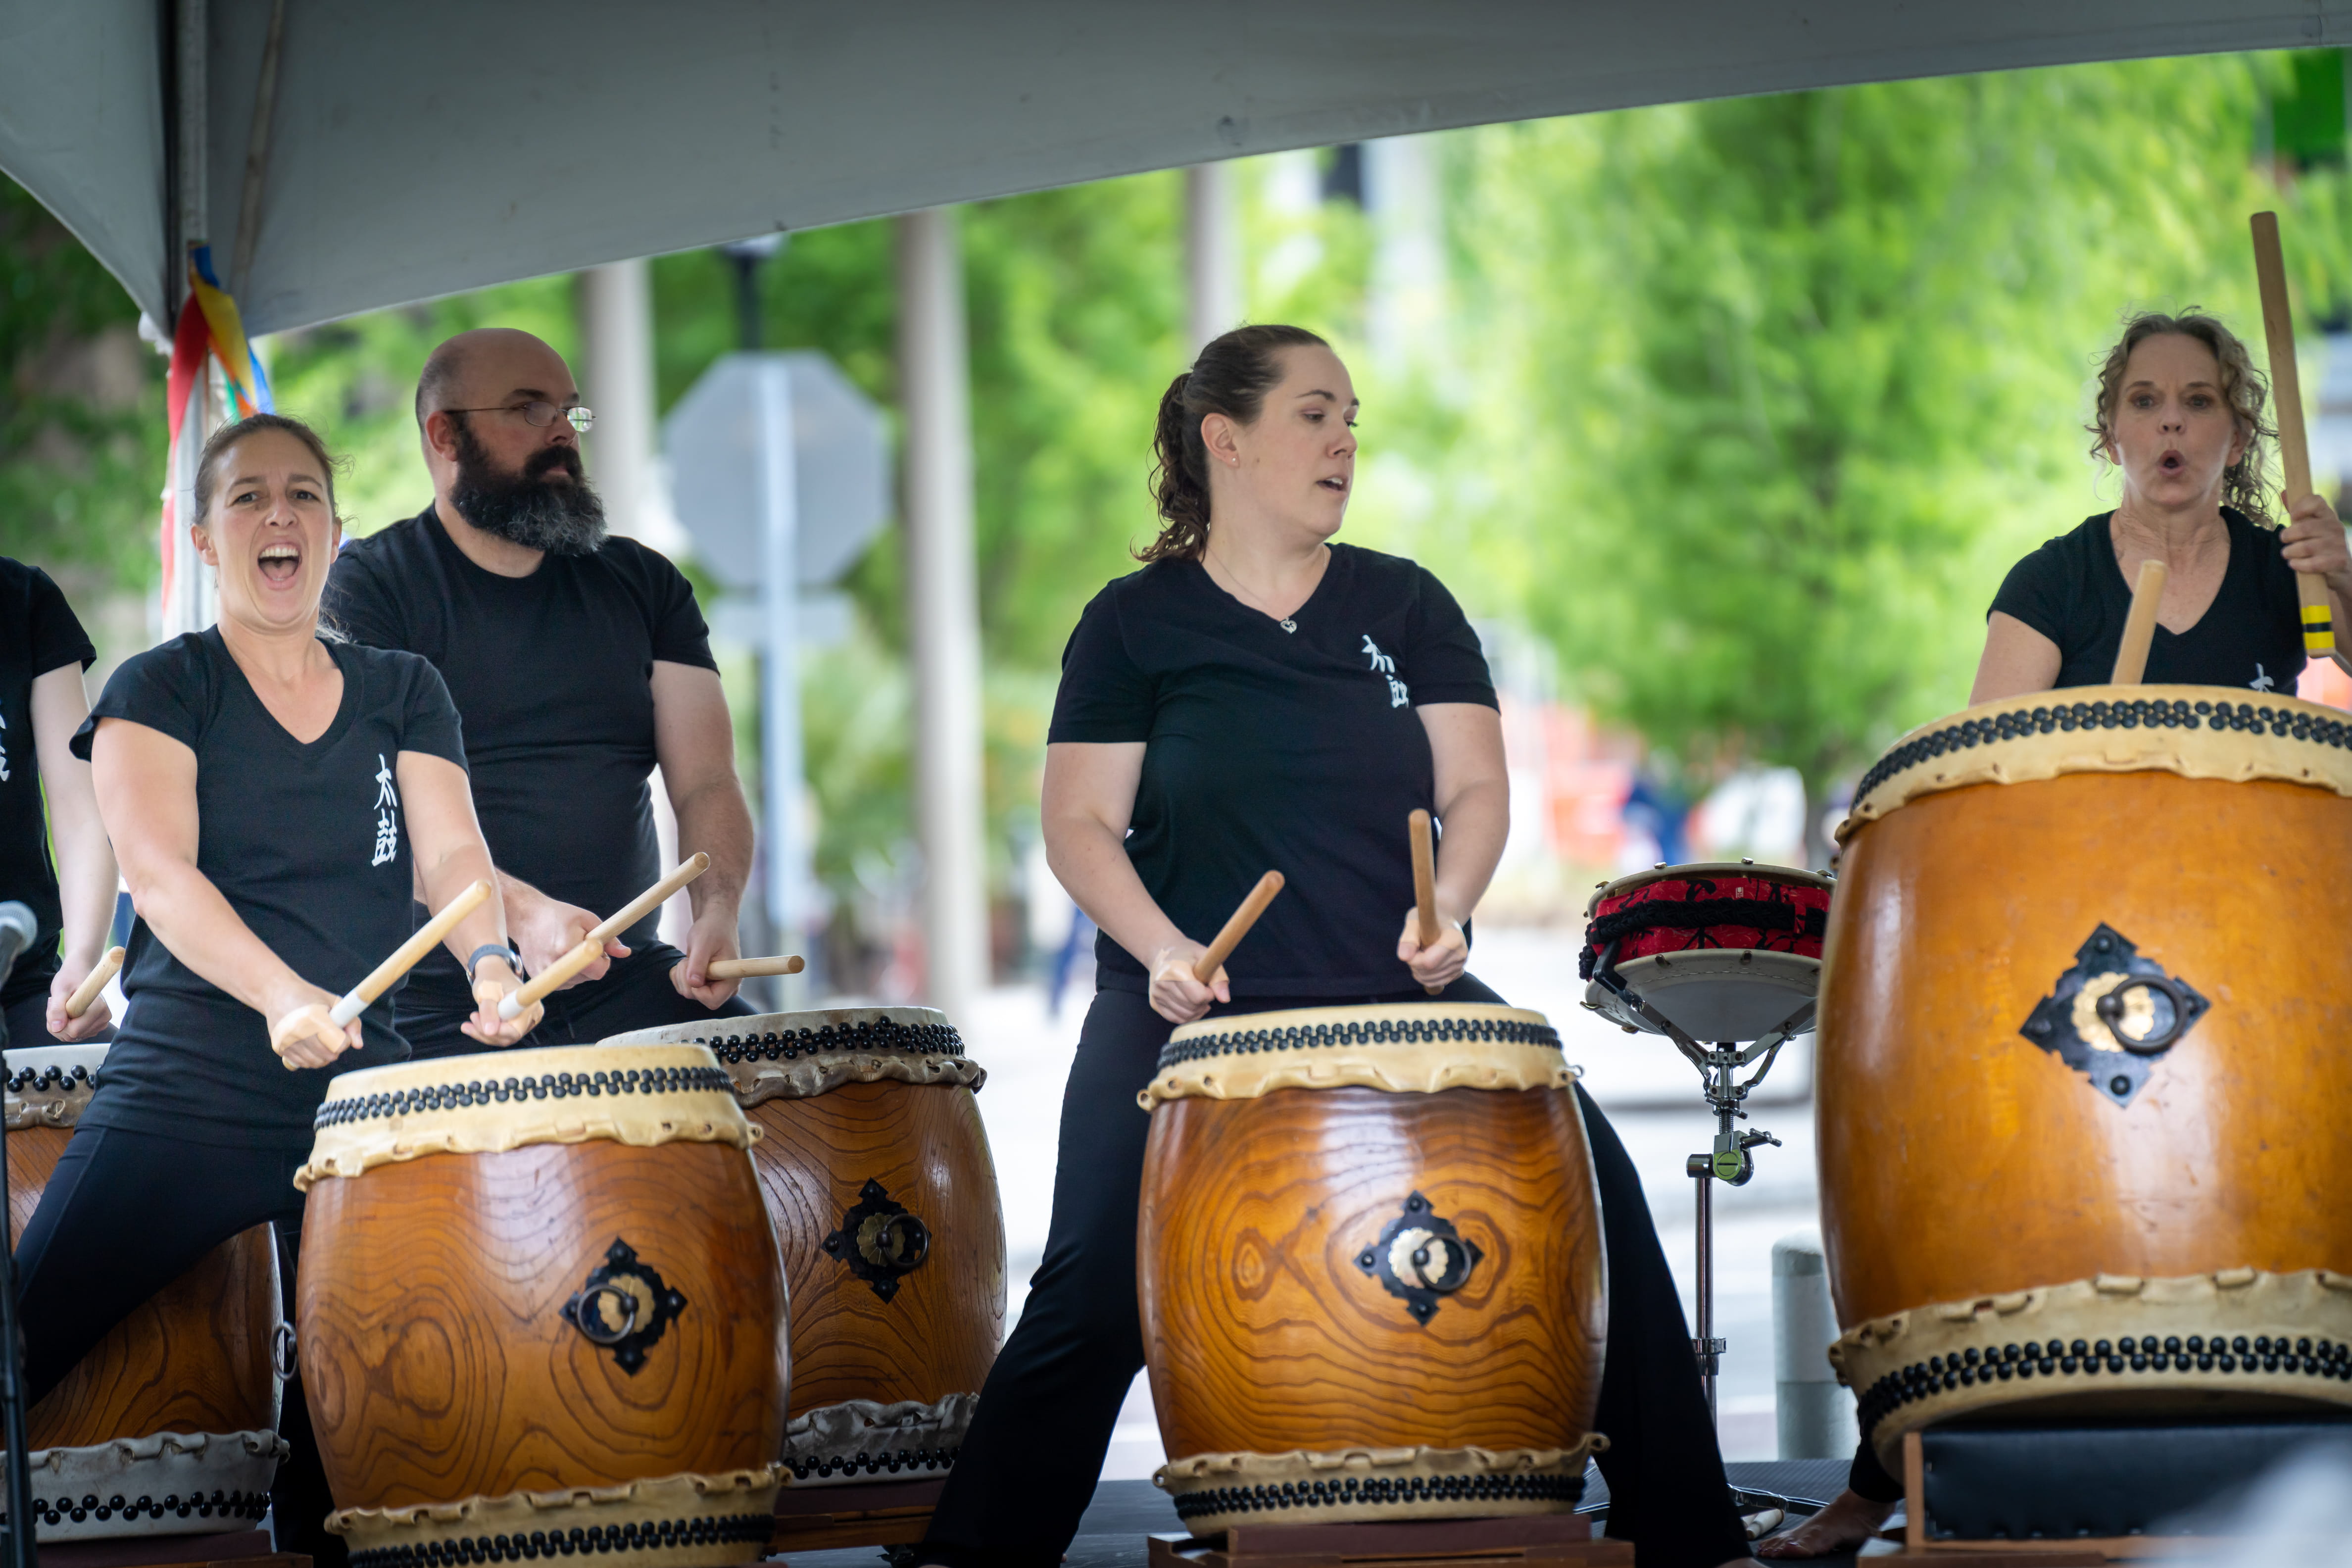 A drum group performs at the International Bazaar.